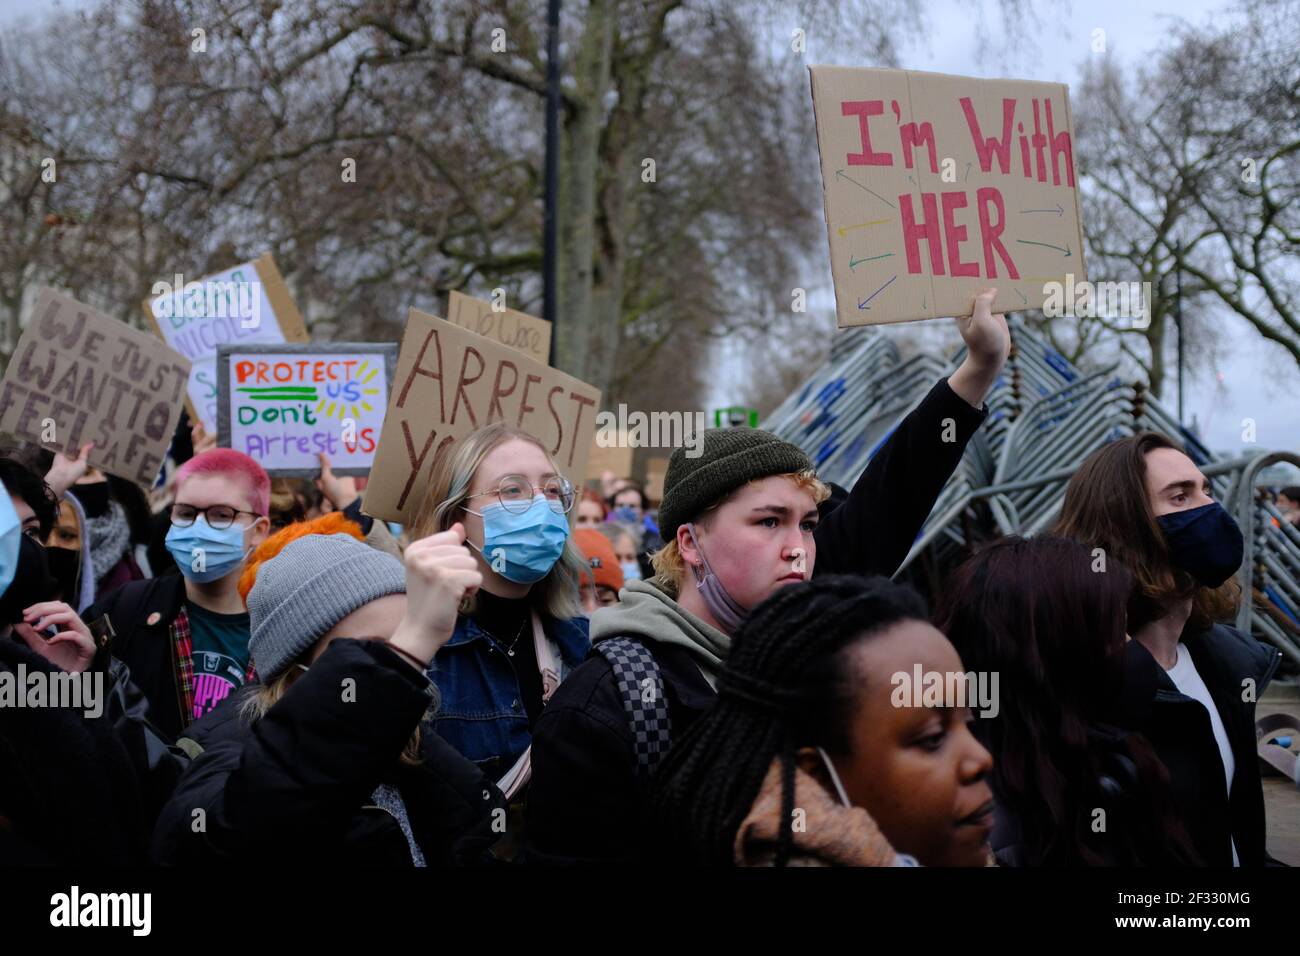 LONDON - 14TH MARCH 2021: A protest outside New Scotland Yard, against police brutality and for women's rights. Stock Photo